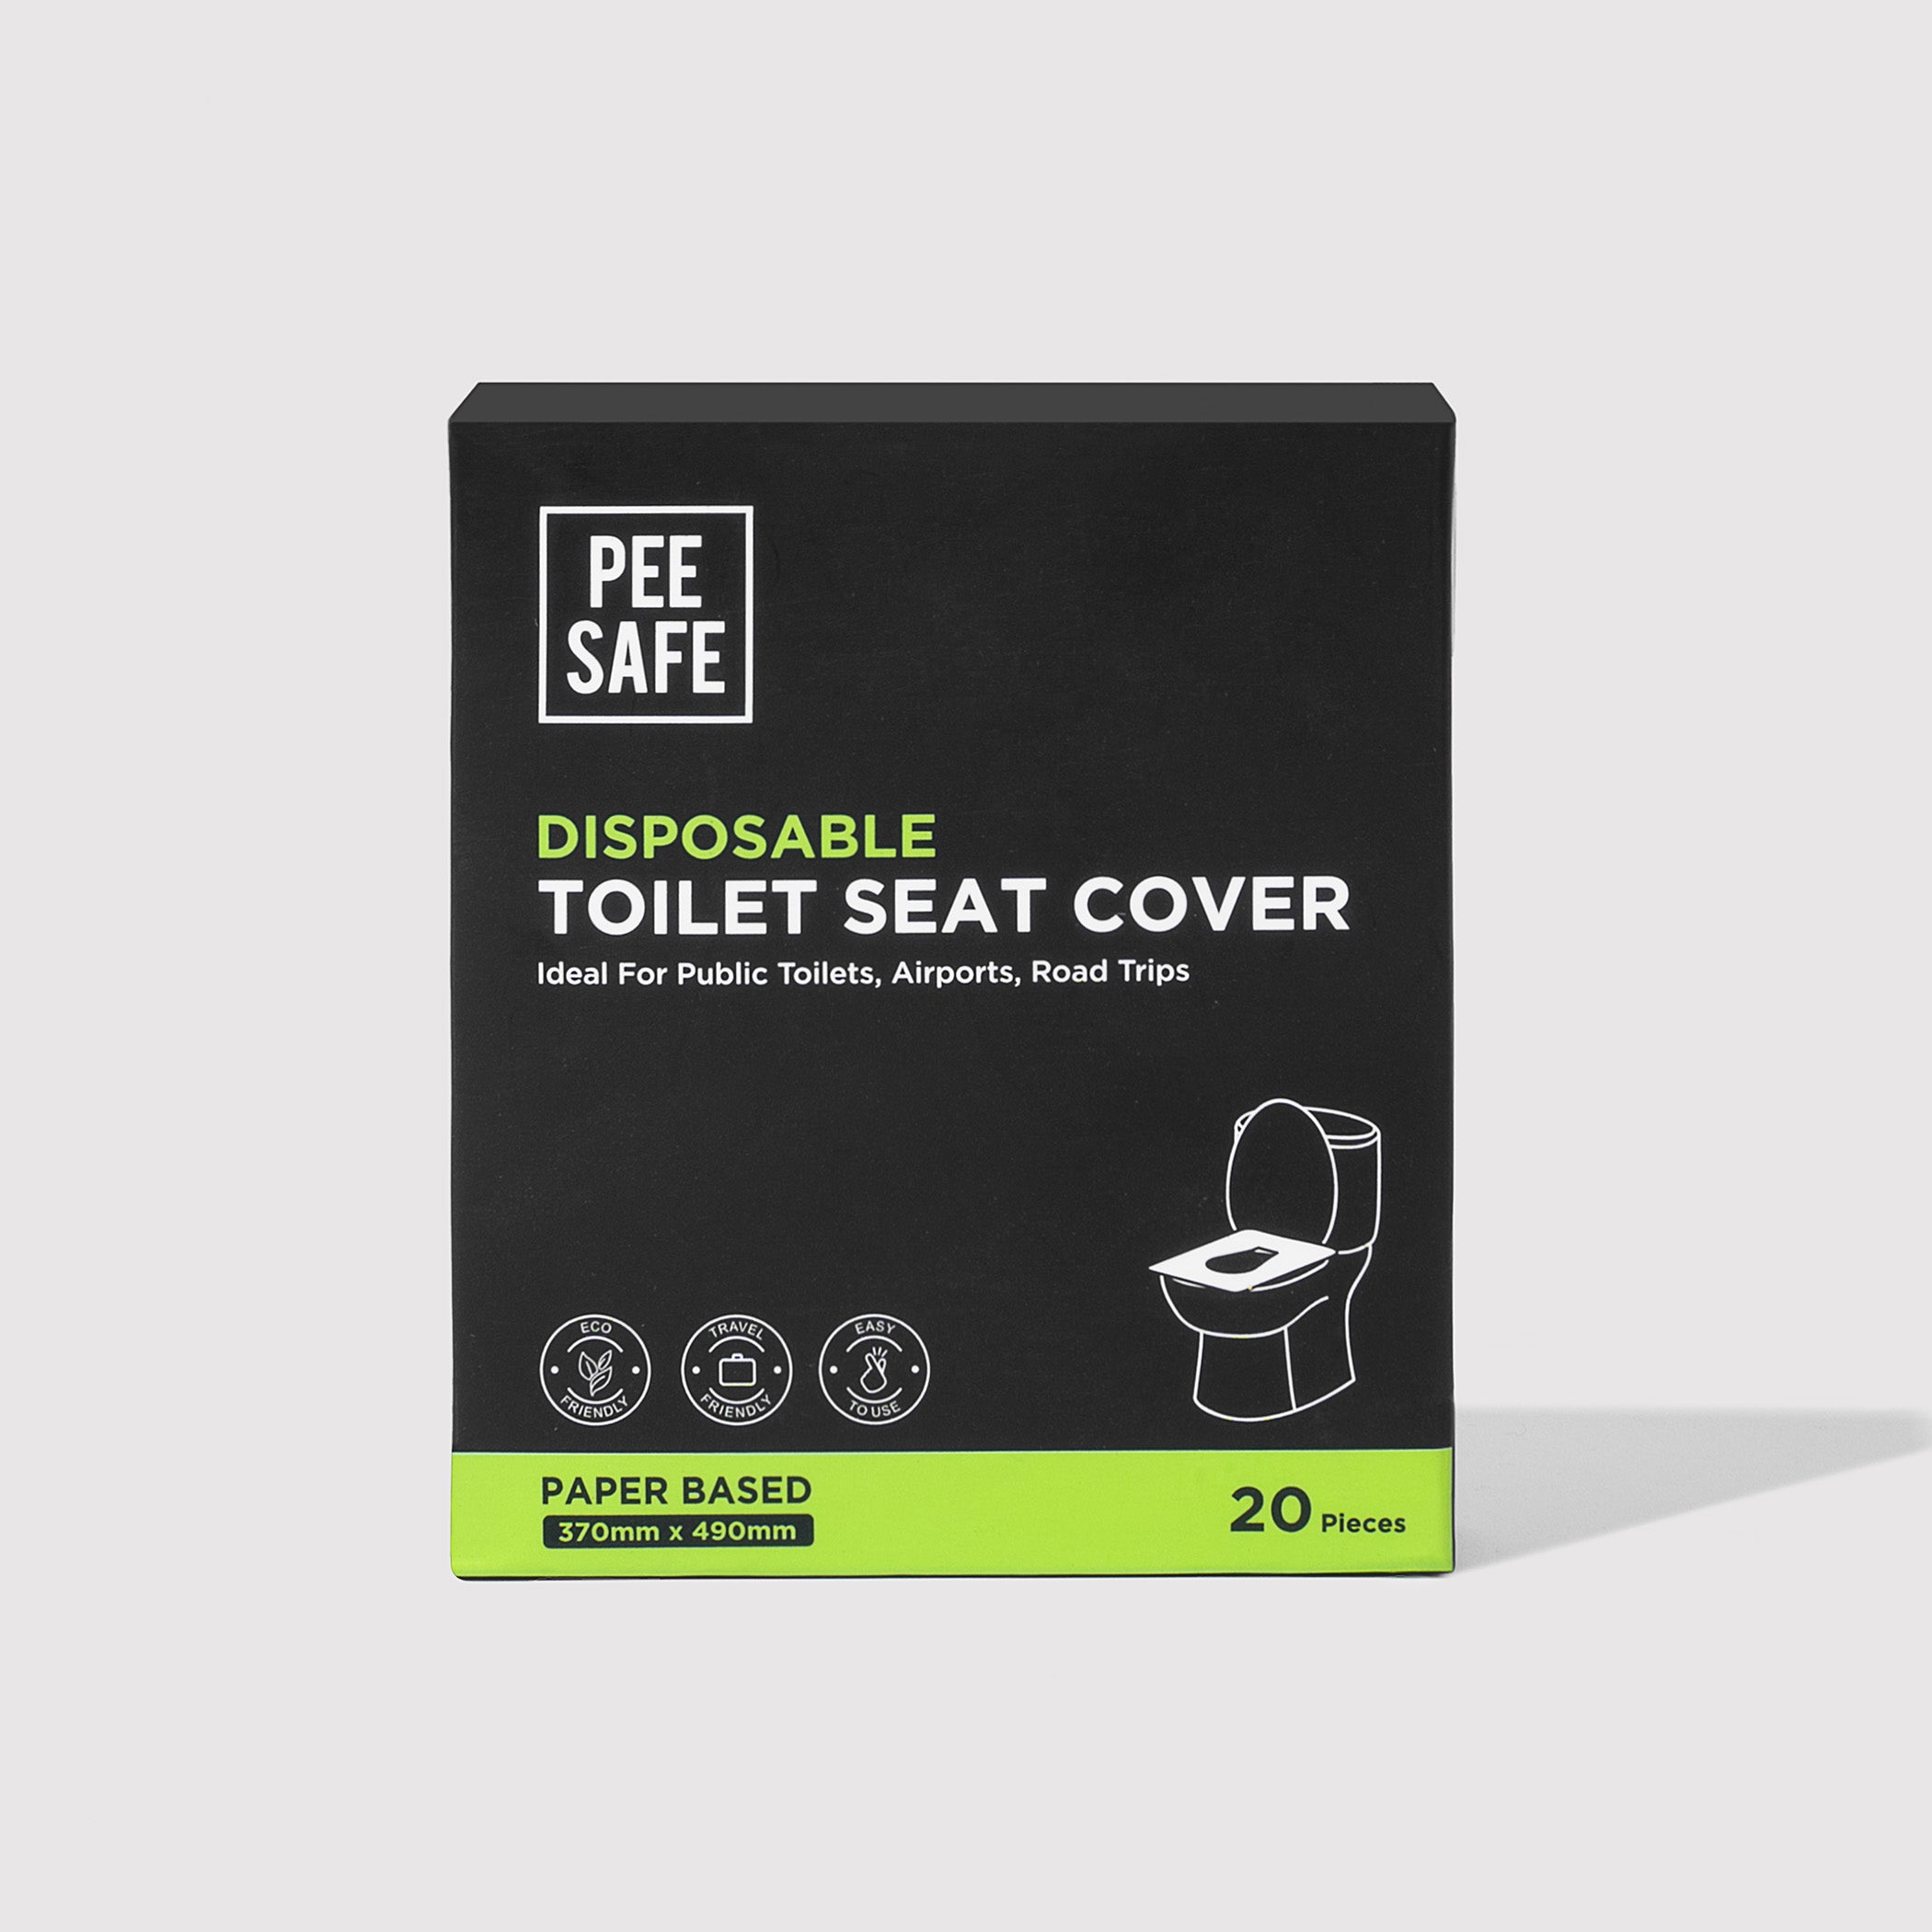 Pee Safe Disposable Toilet Seat Cover (20N)